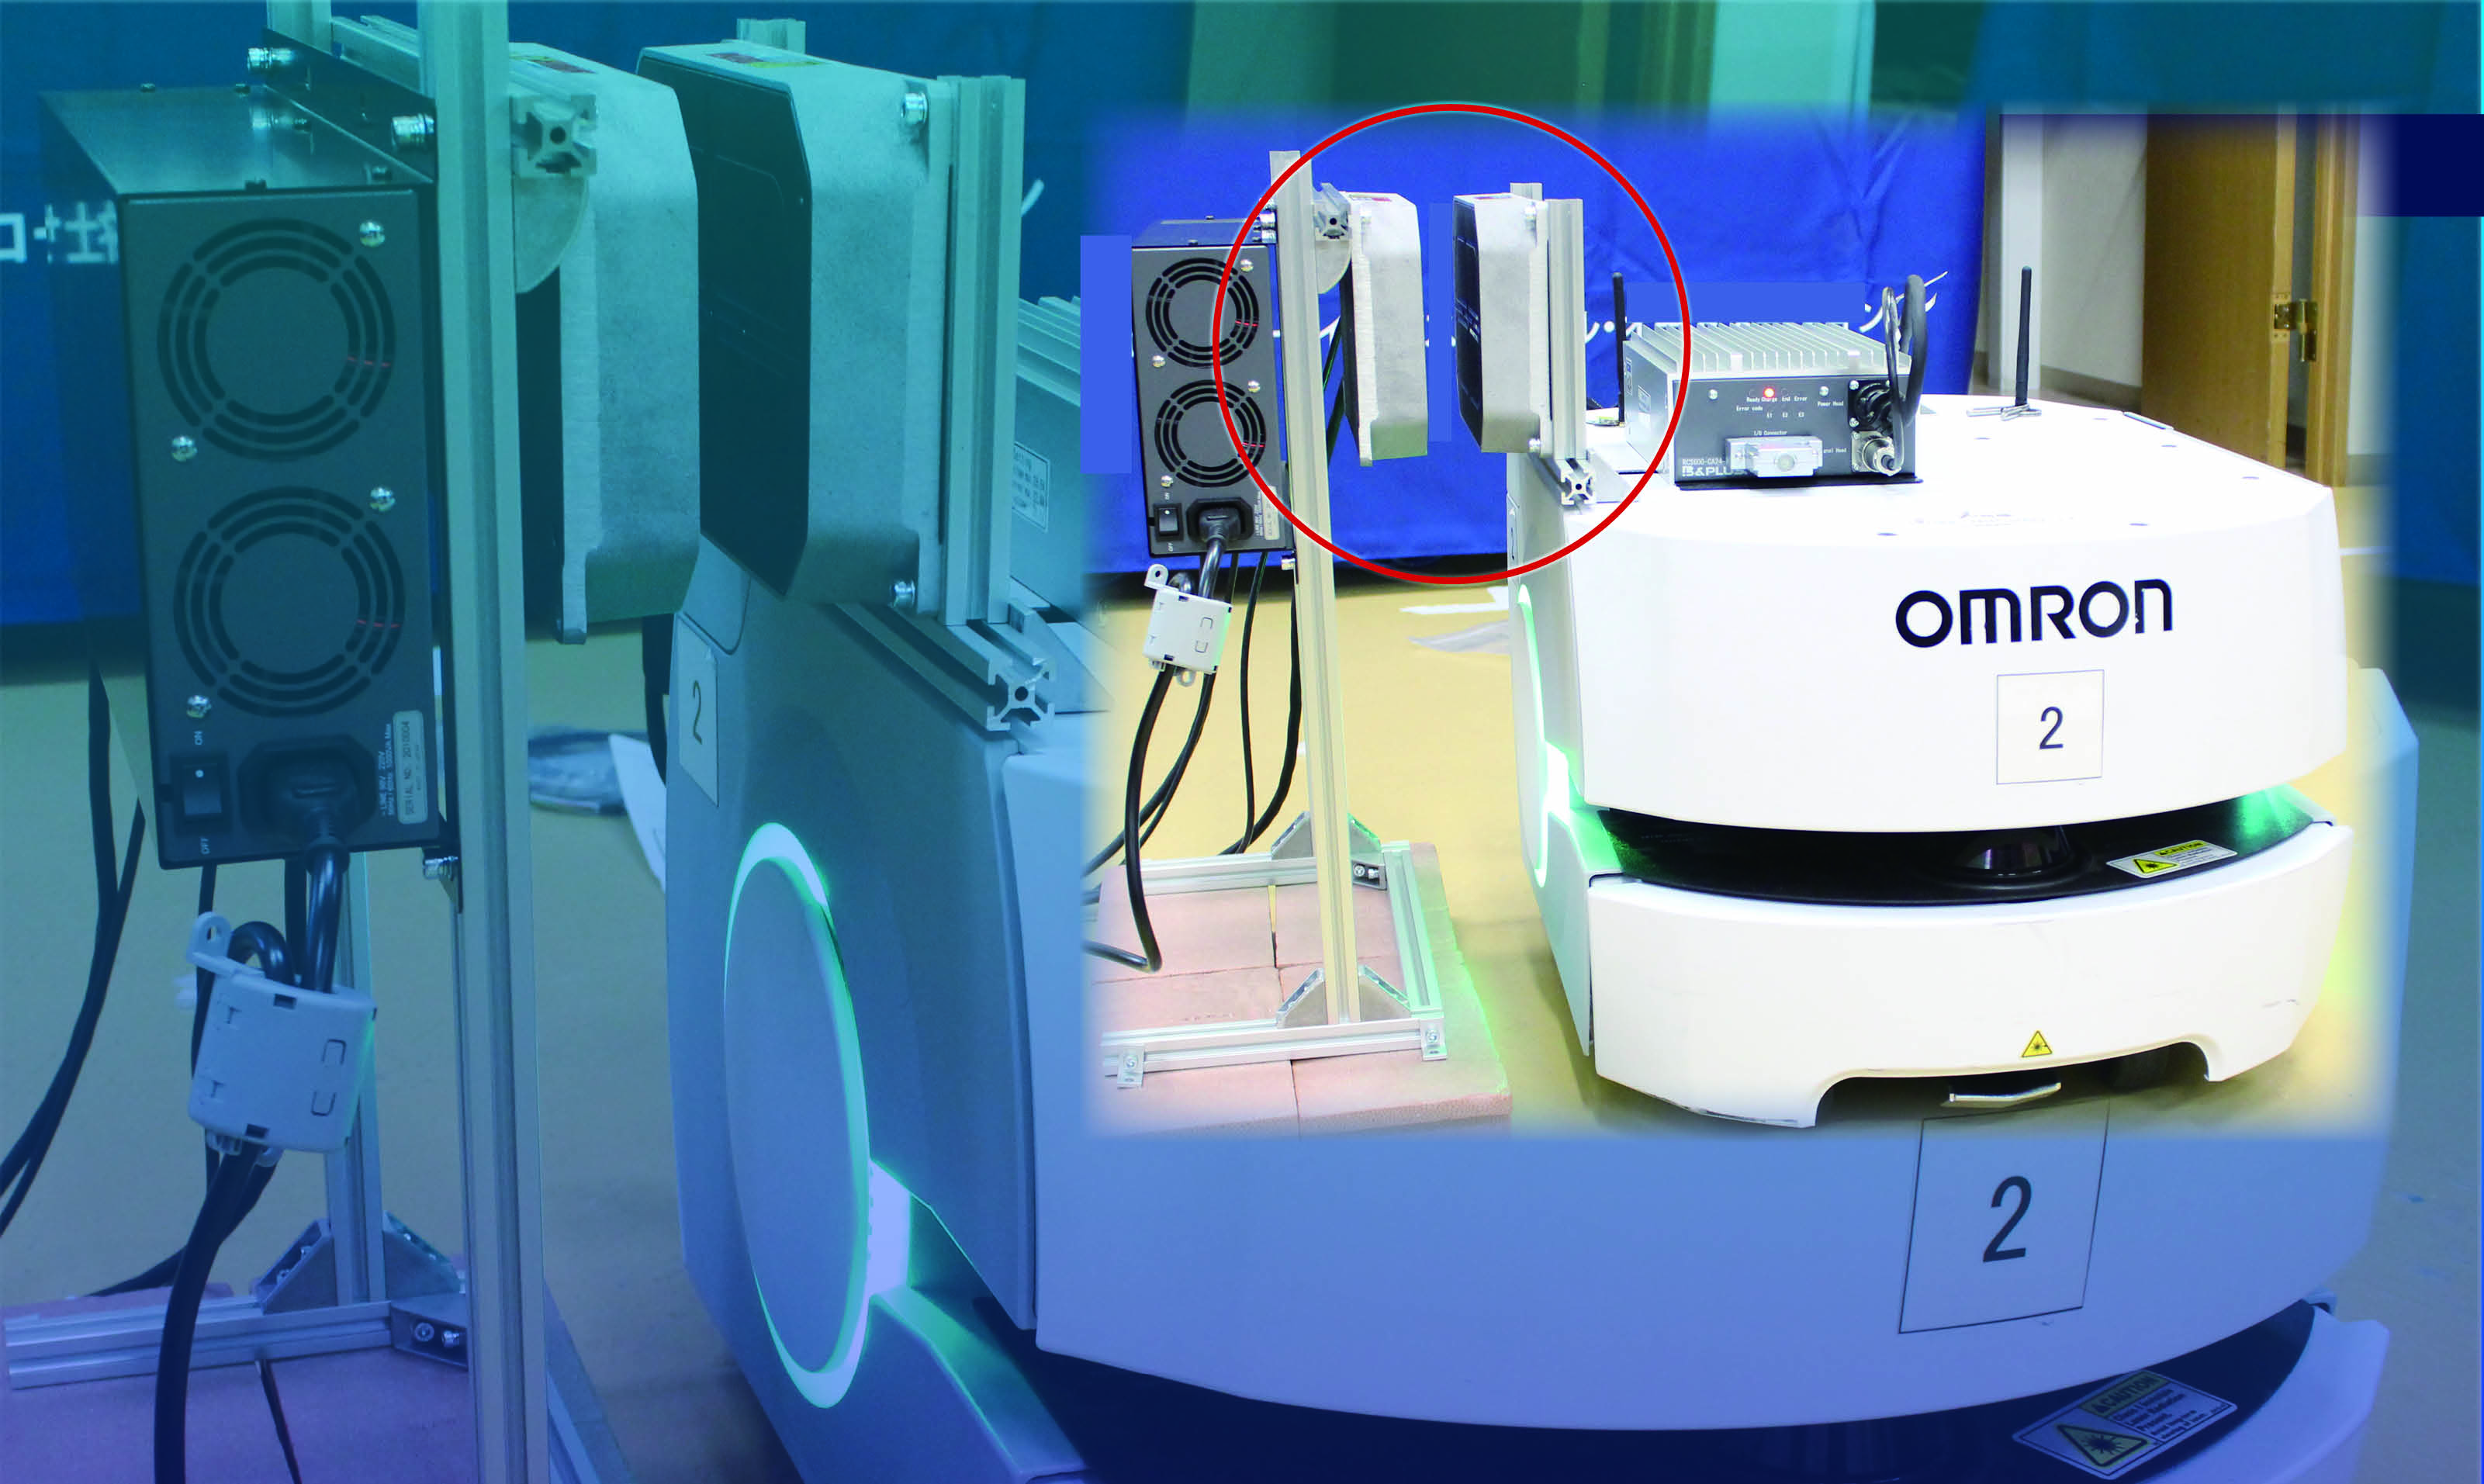 Wireless charging has been realized for the OMRON mobile robot LD series!